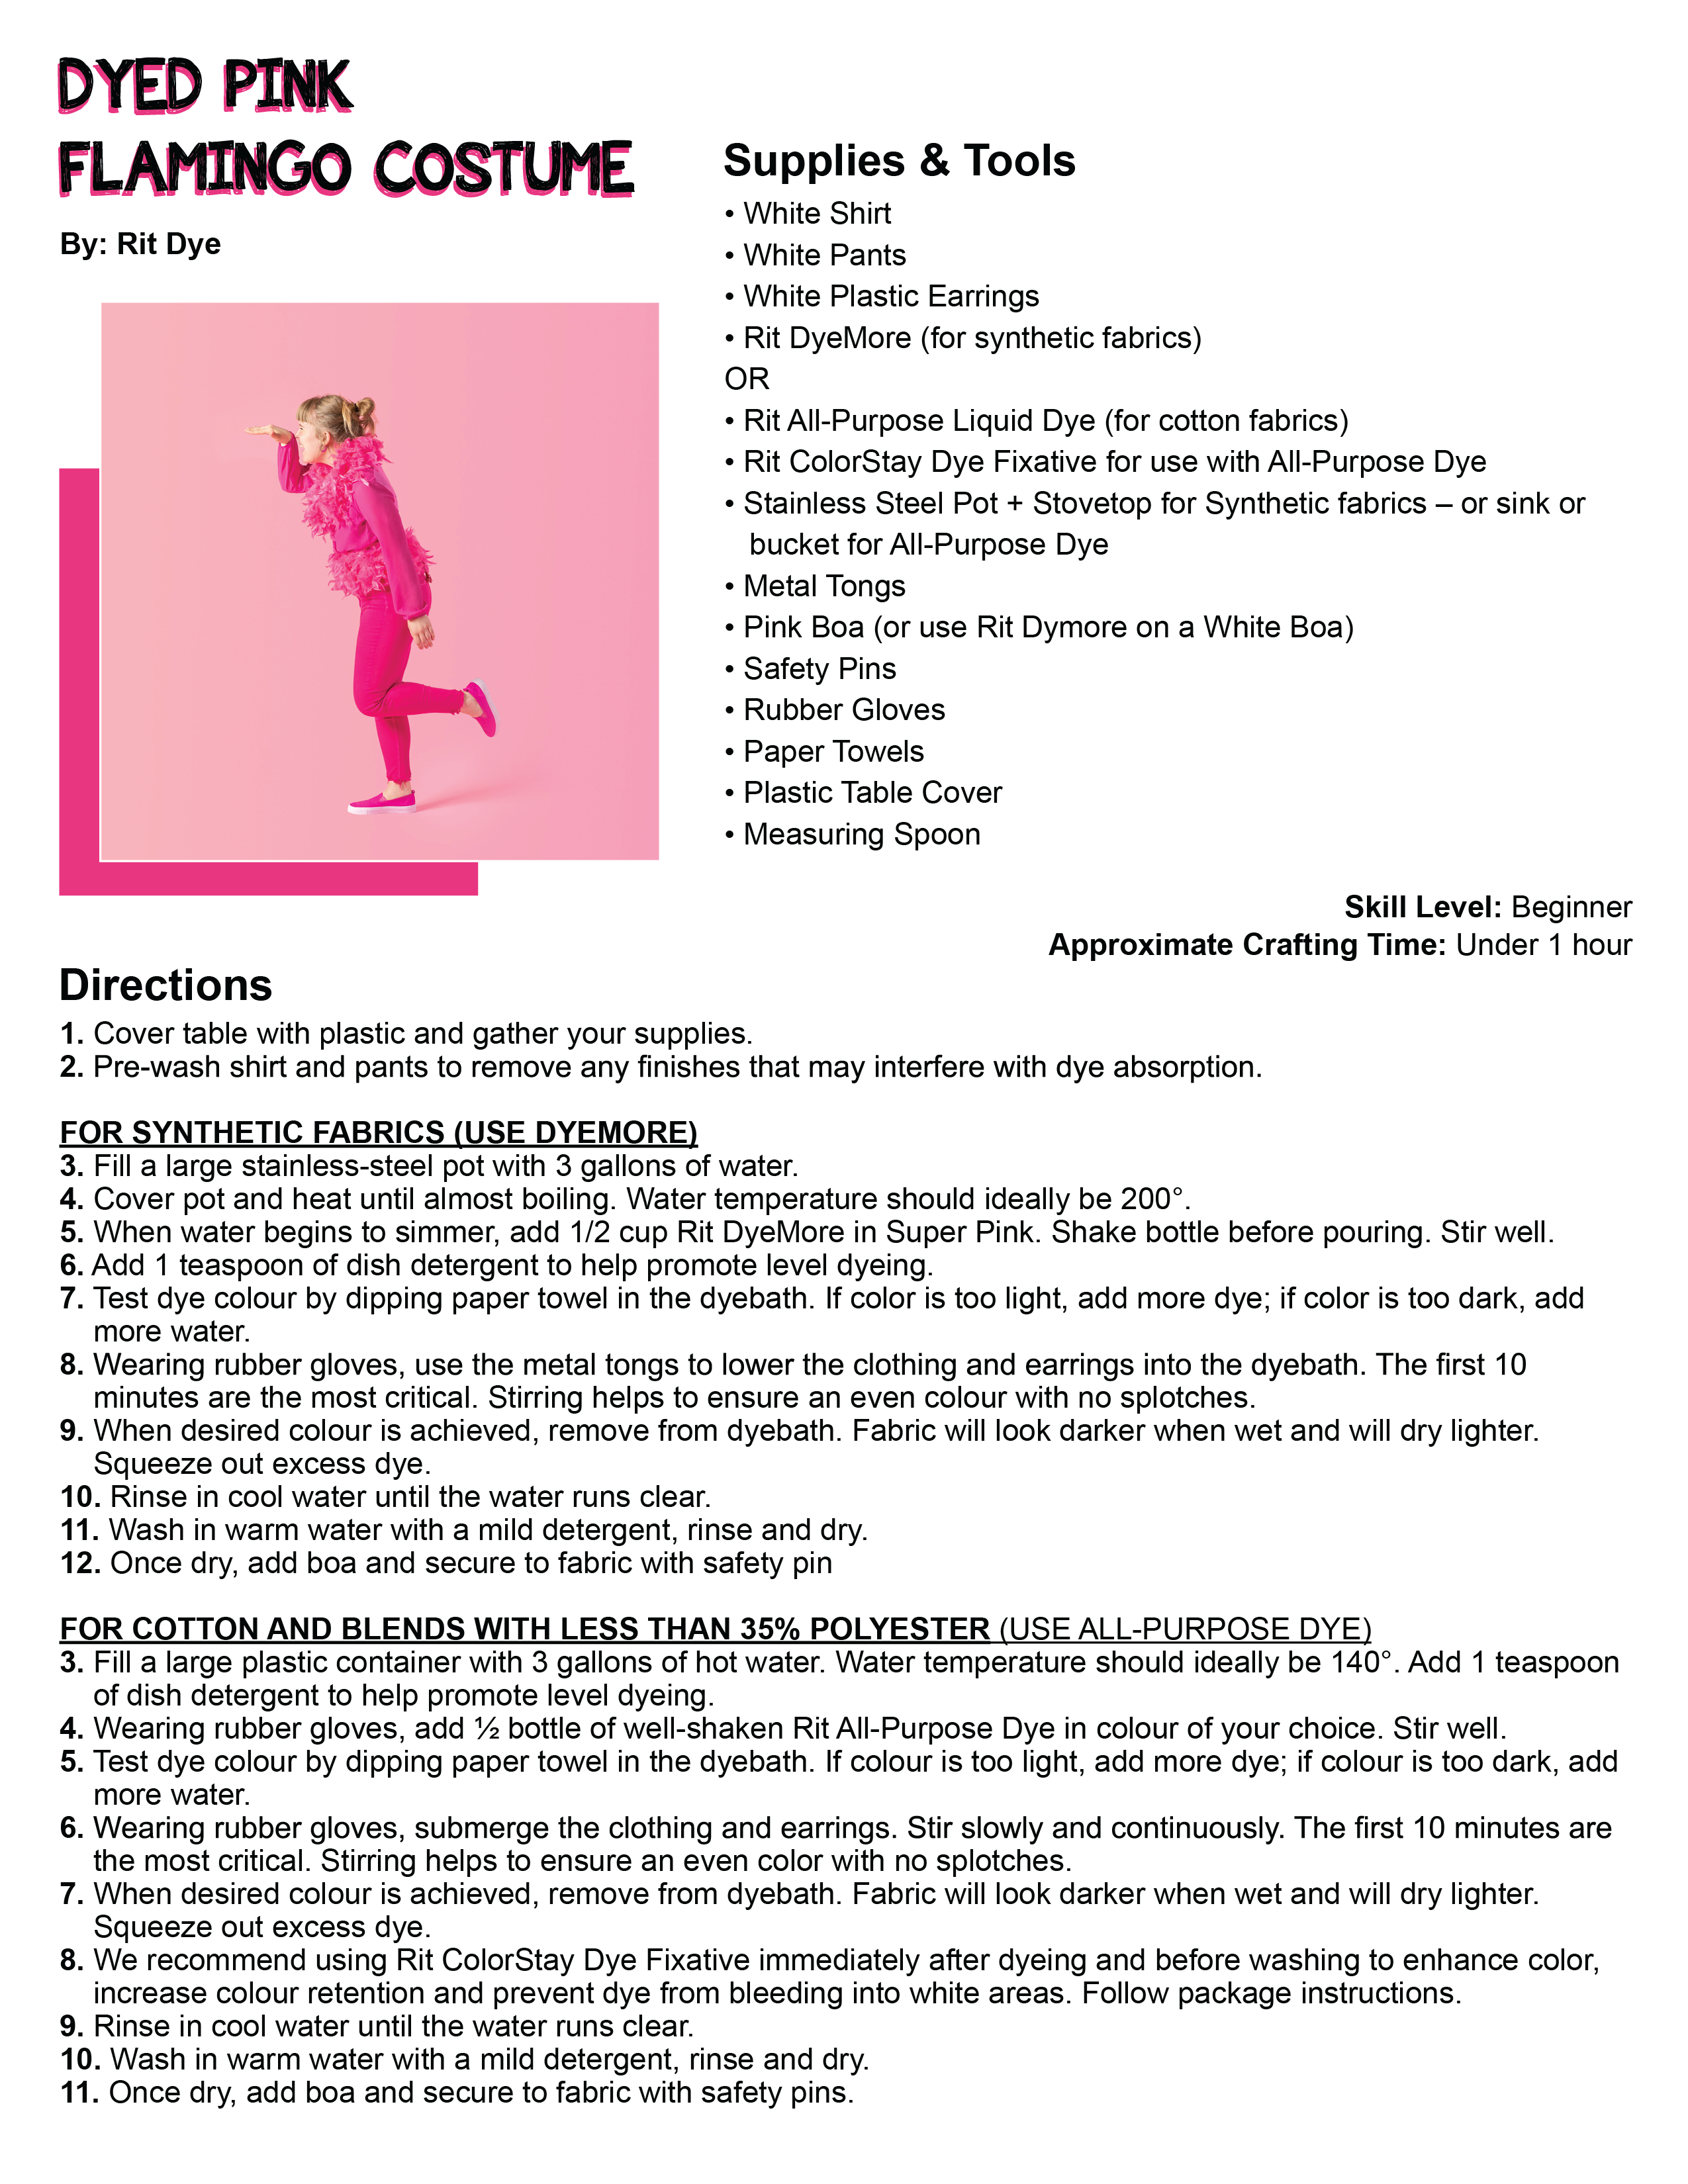 Steps to create your pink flamingo costume